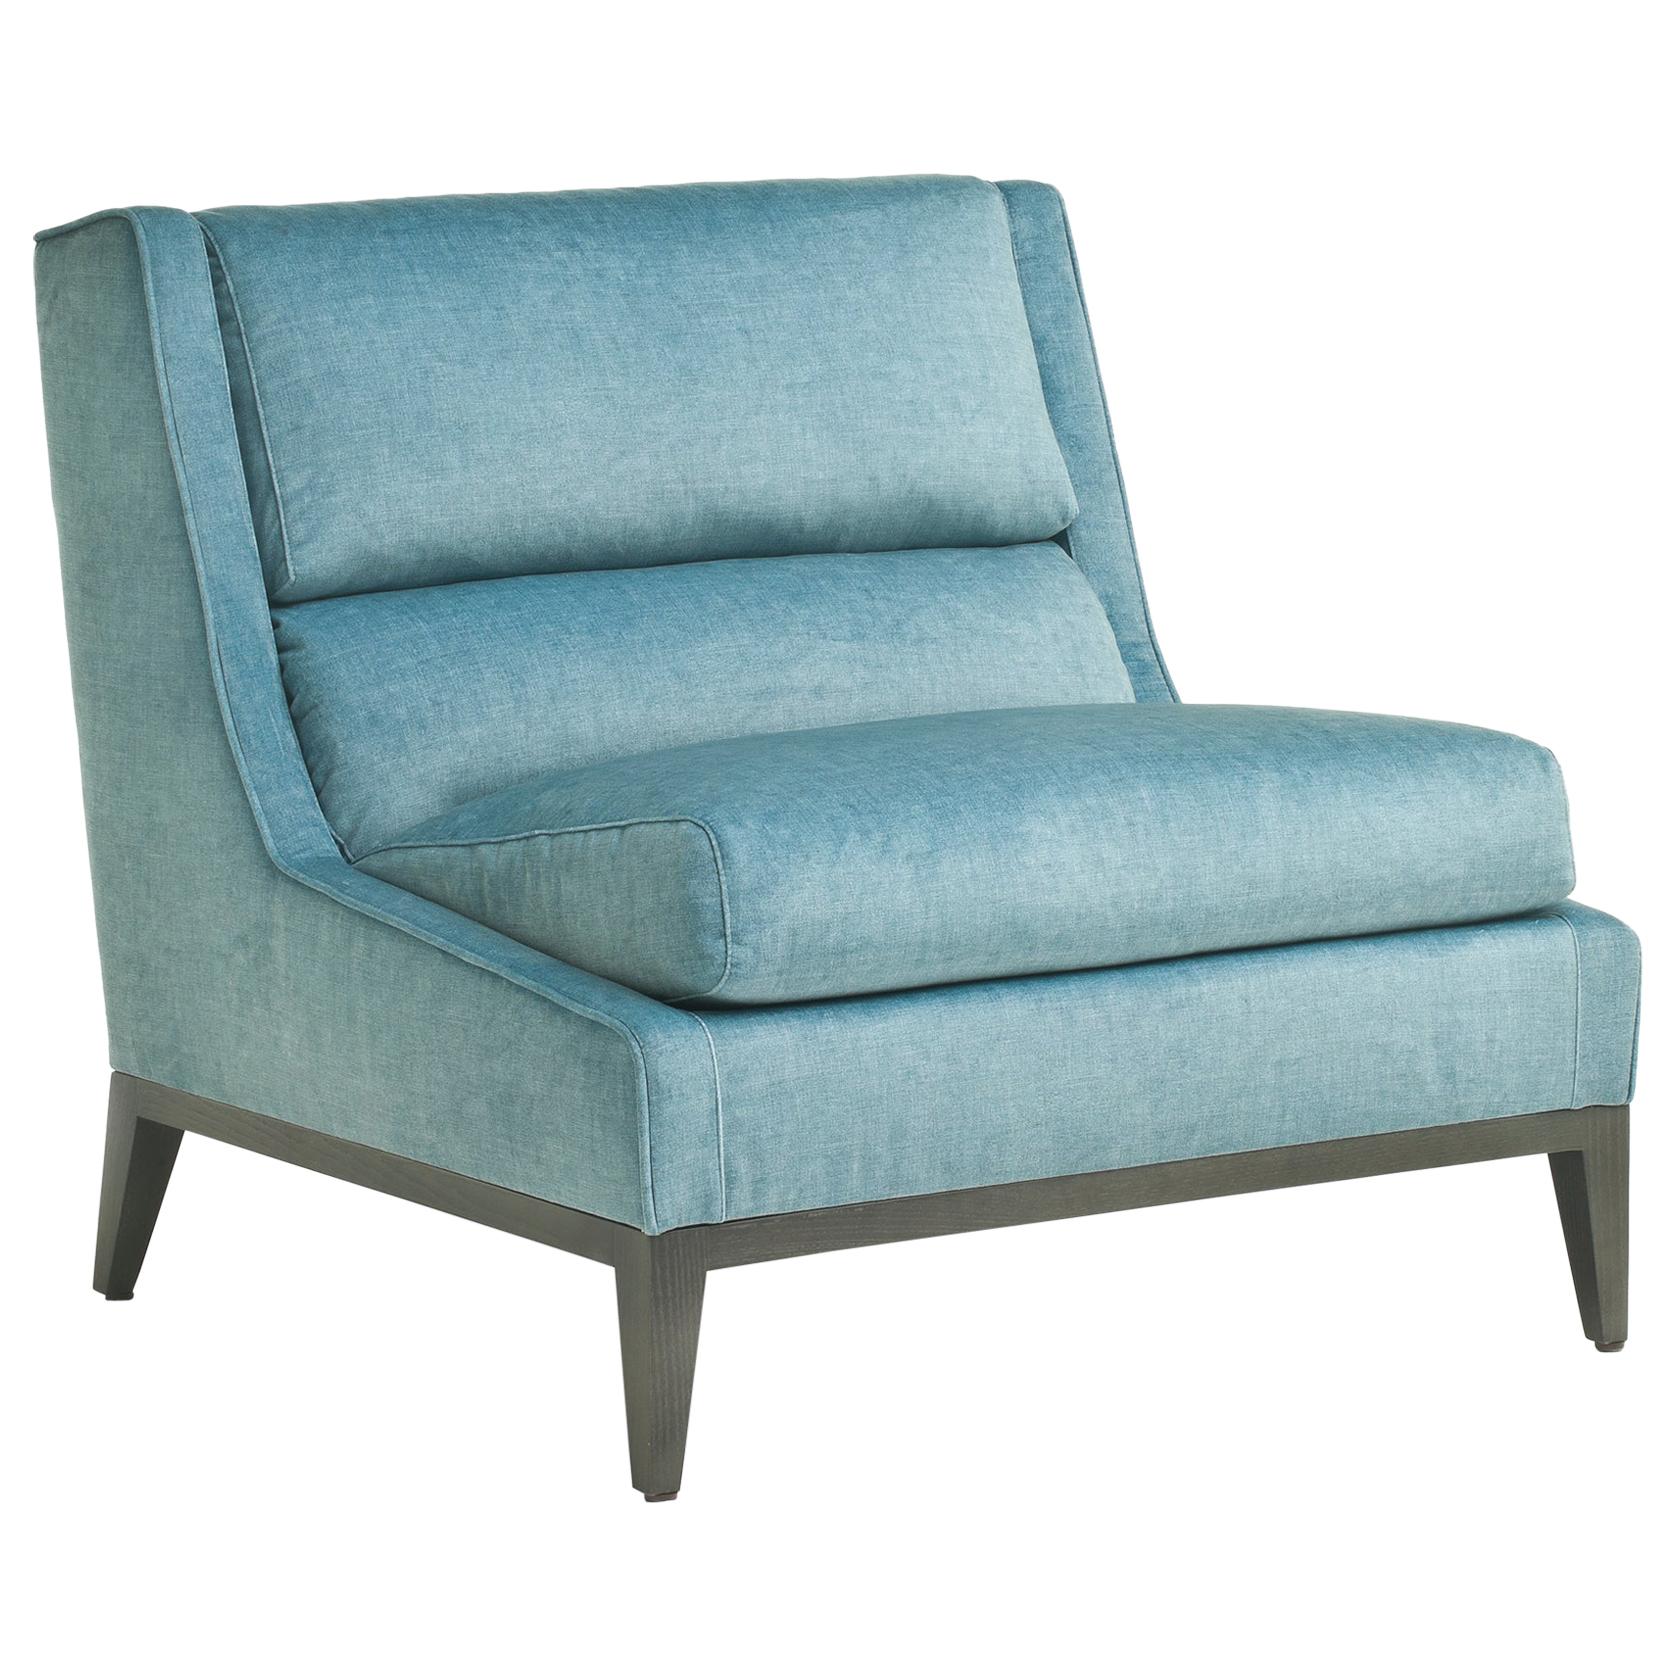 OVERSEAS Light Blue Upholstered Lounge Armchair in Solid Ash Wood and Black Fin. For Sale